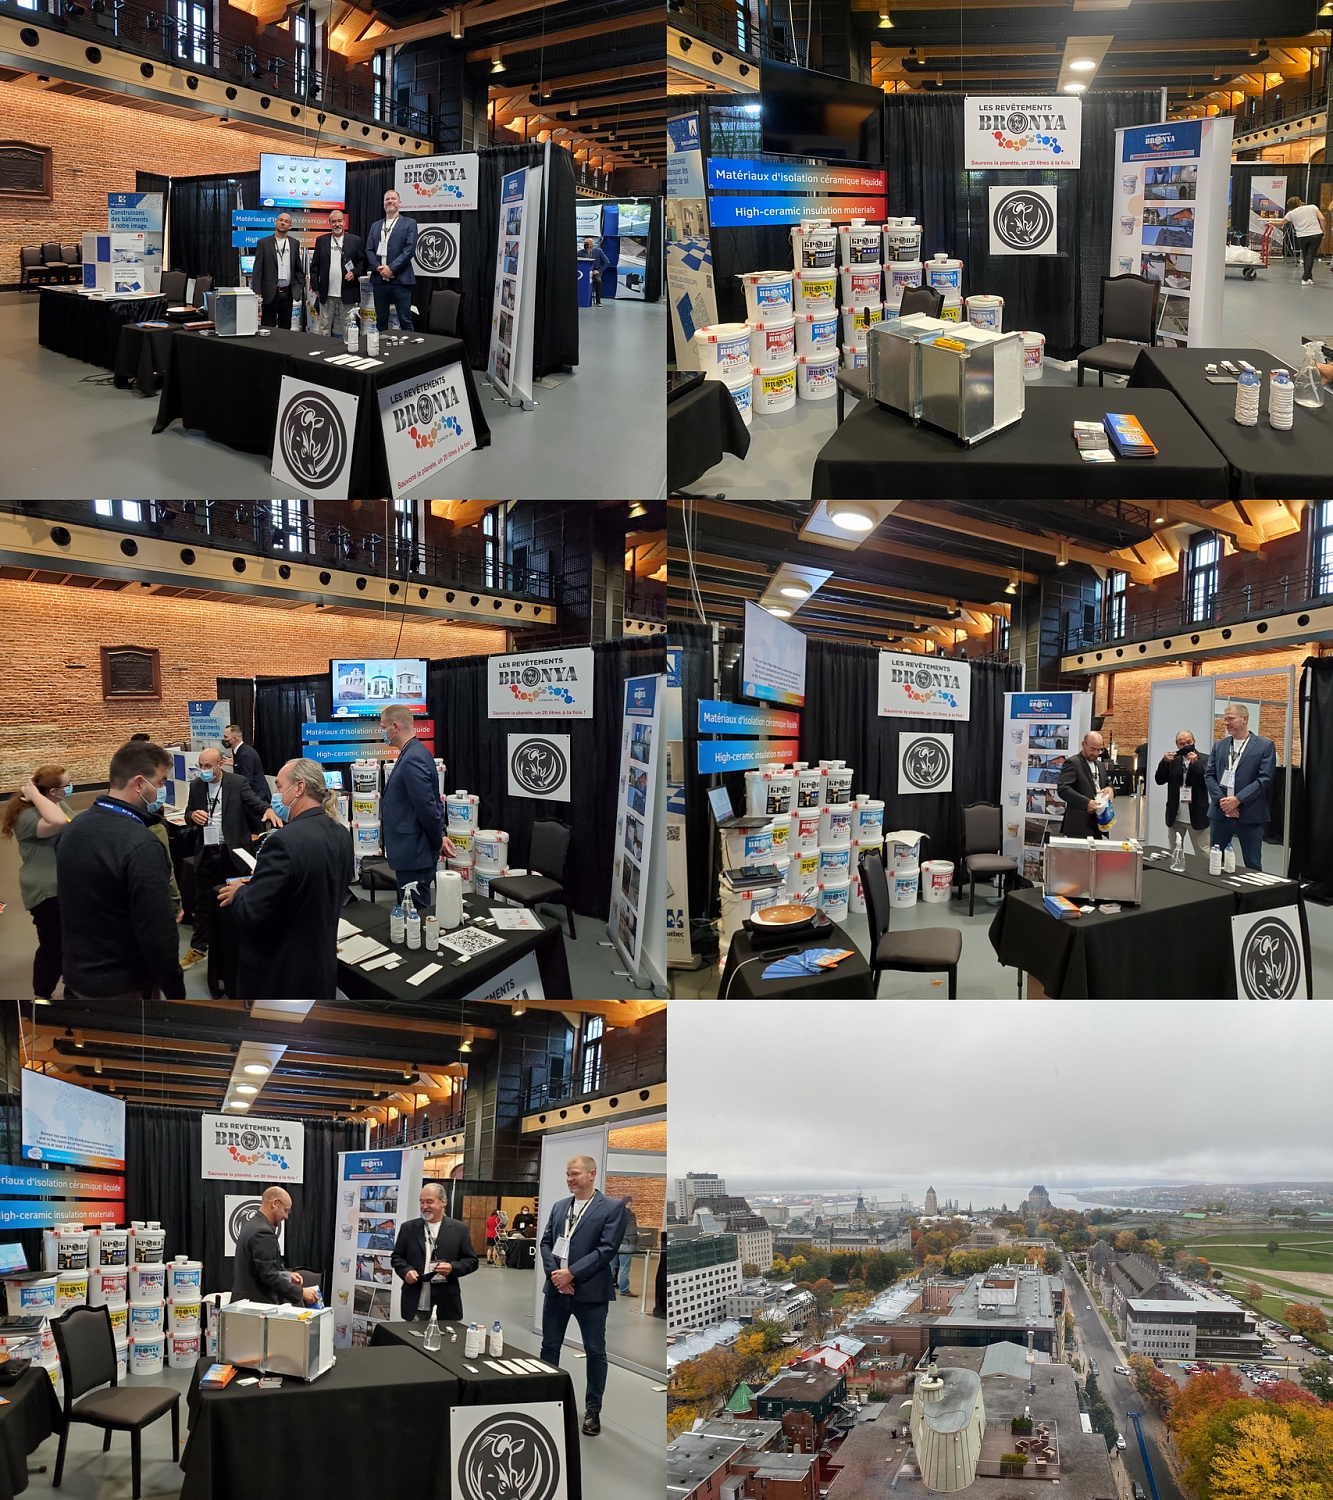 Bronya at the largest construction exhibition "Contech" in Quebec, Canada